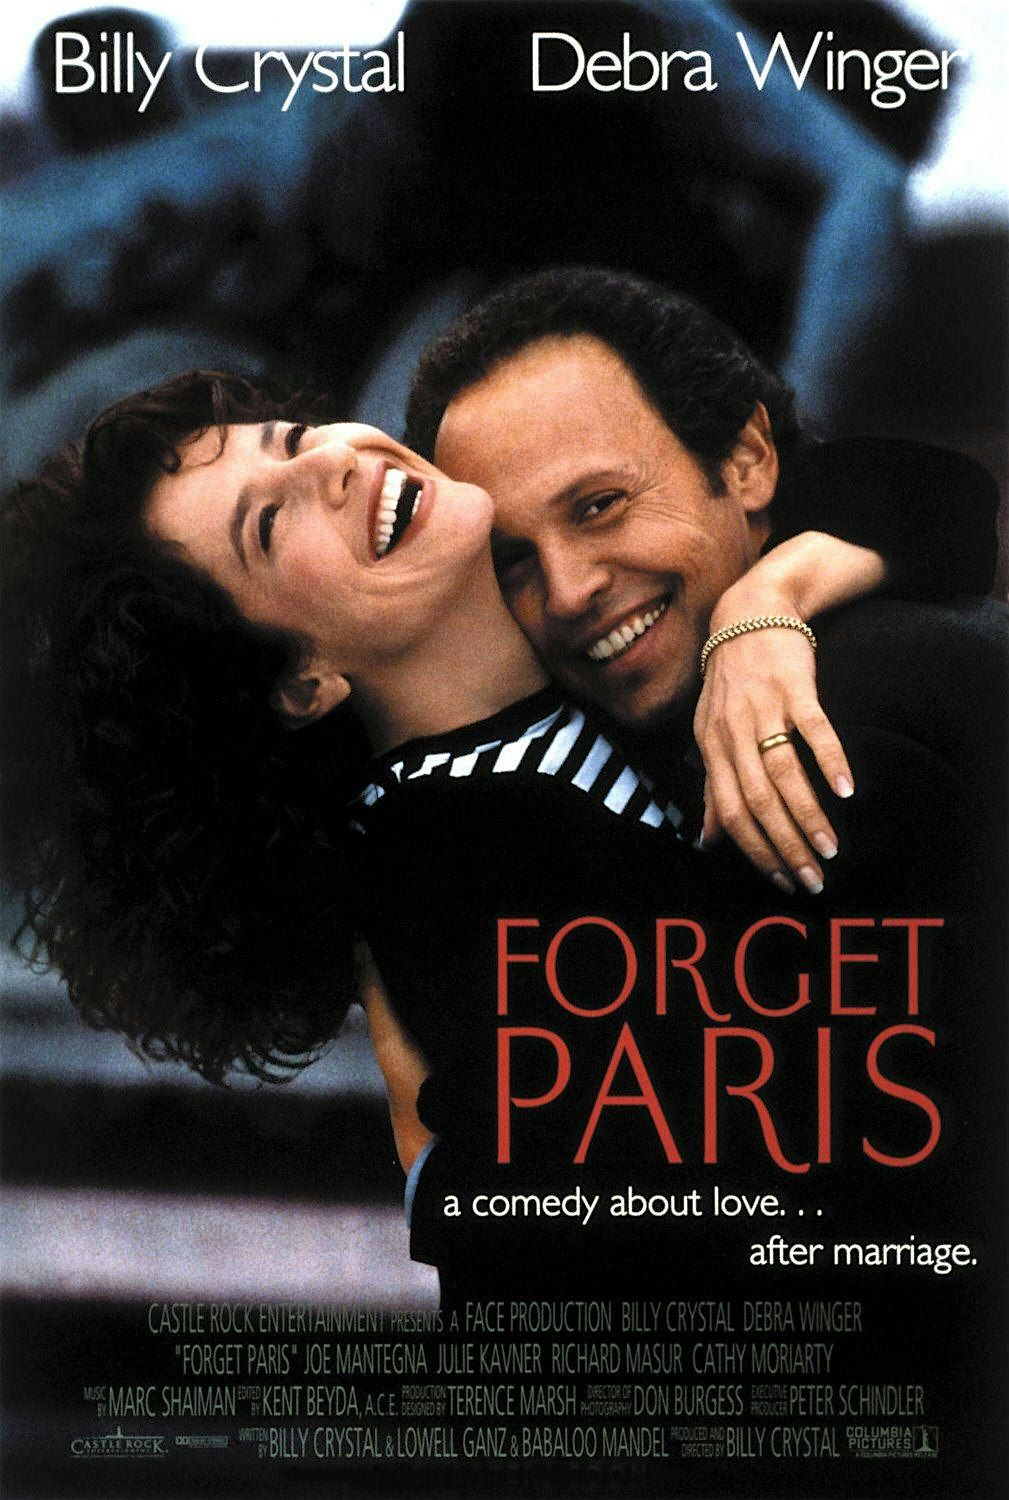 Forget Paris - classic Billy Crystal comedy at the Historic Select Theater